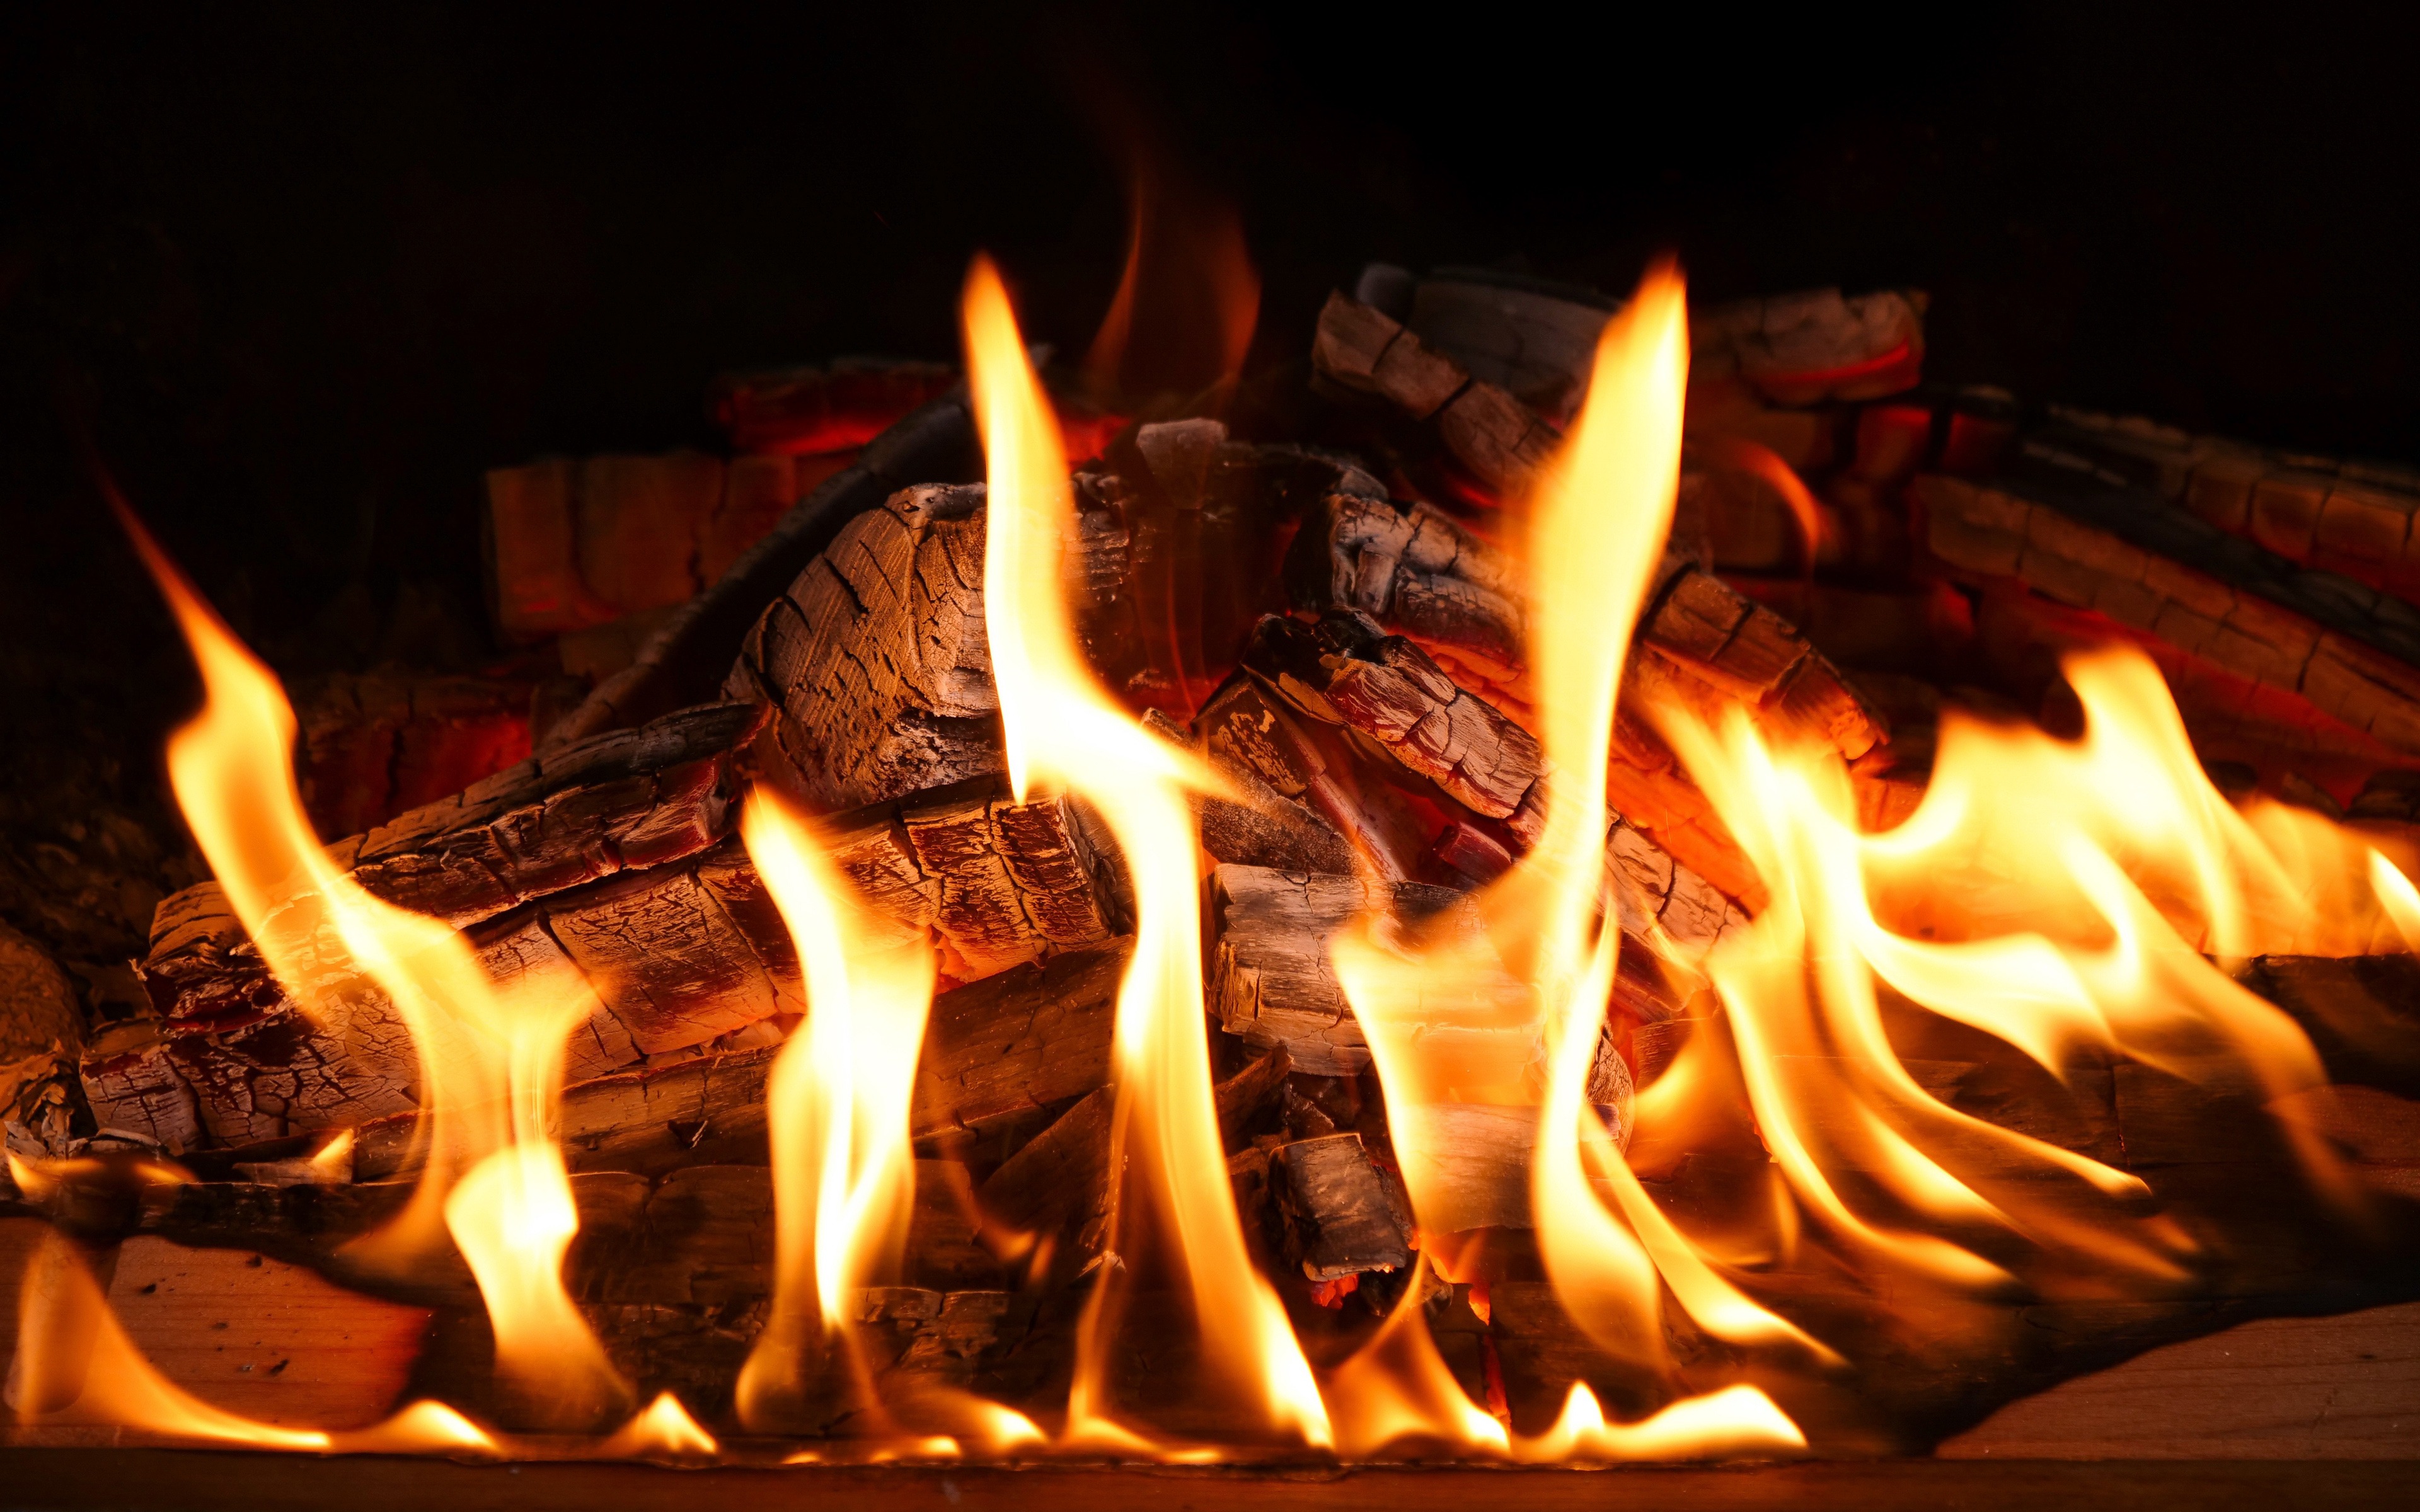 Download Wallpaper Fire, 4k, Firewood, Fireplace, Wood Charcoal, Flames, Close Up For Desktop With Resolution 3840x2400. High Quality HD Picture Wallpaper